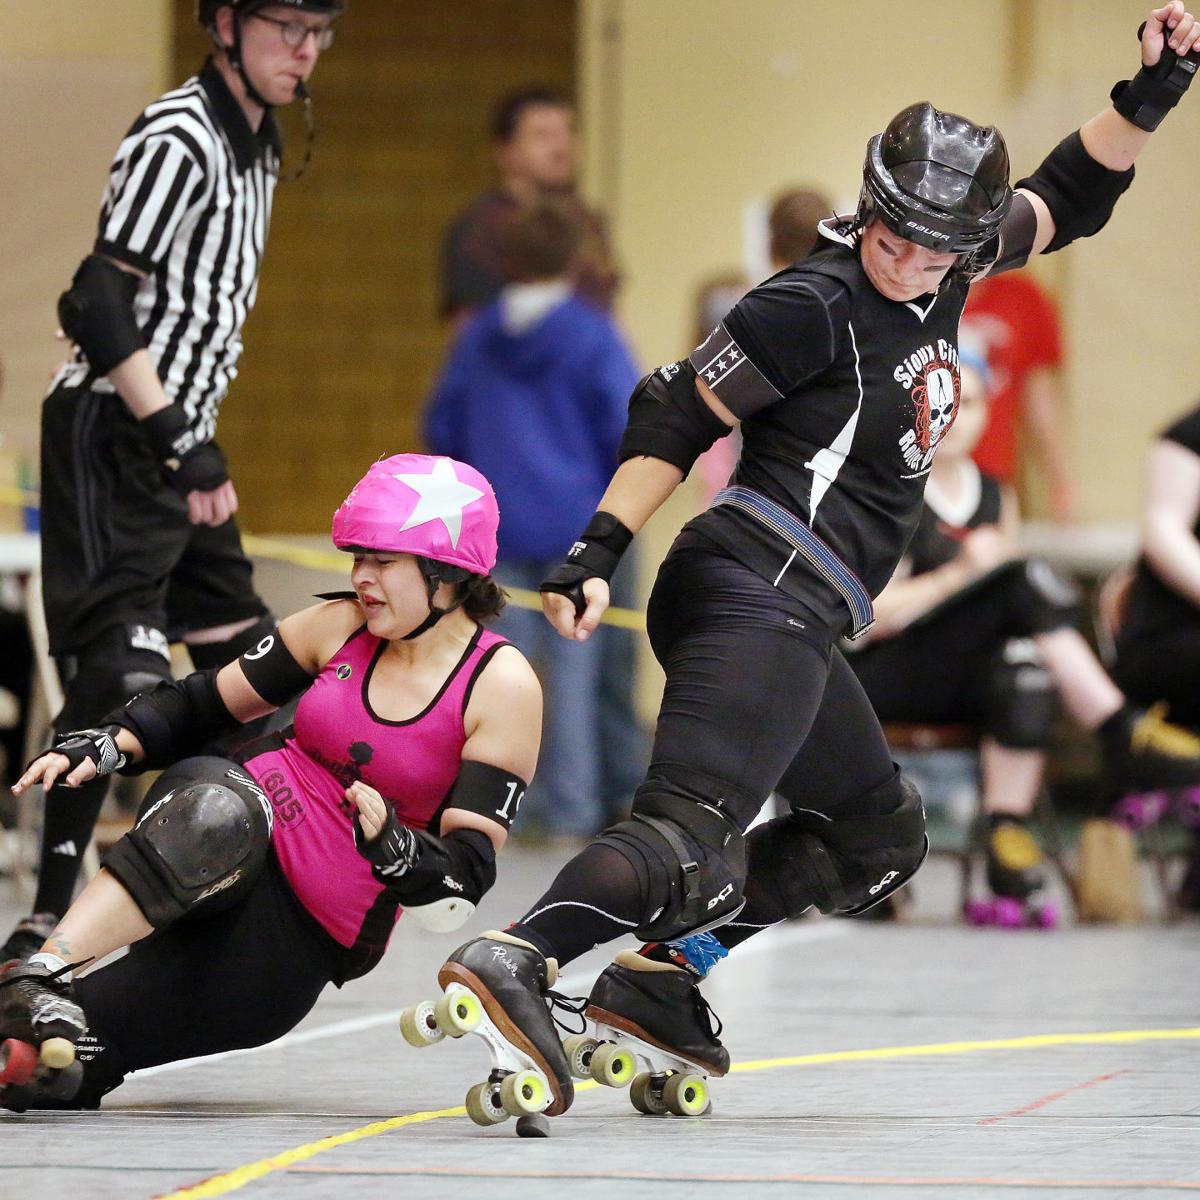 Roll out: Sioux City Roller Dames retire their jerseys but values still ...